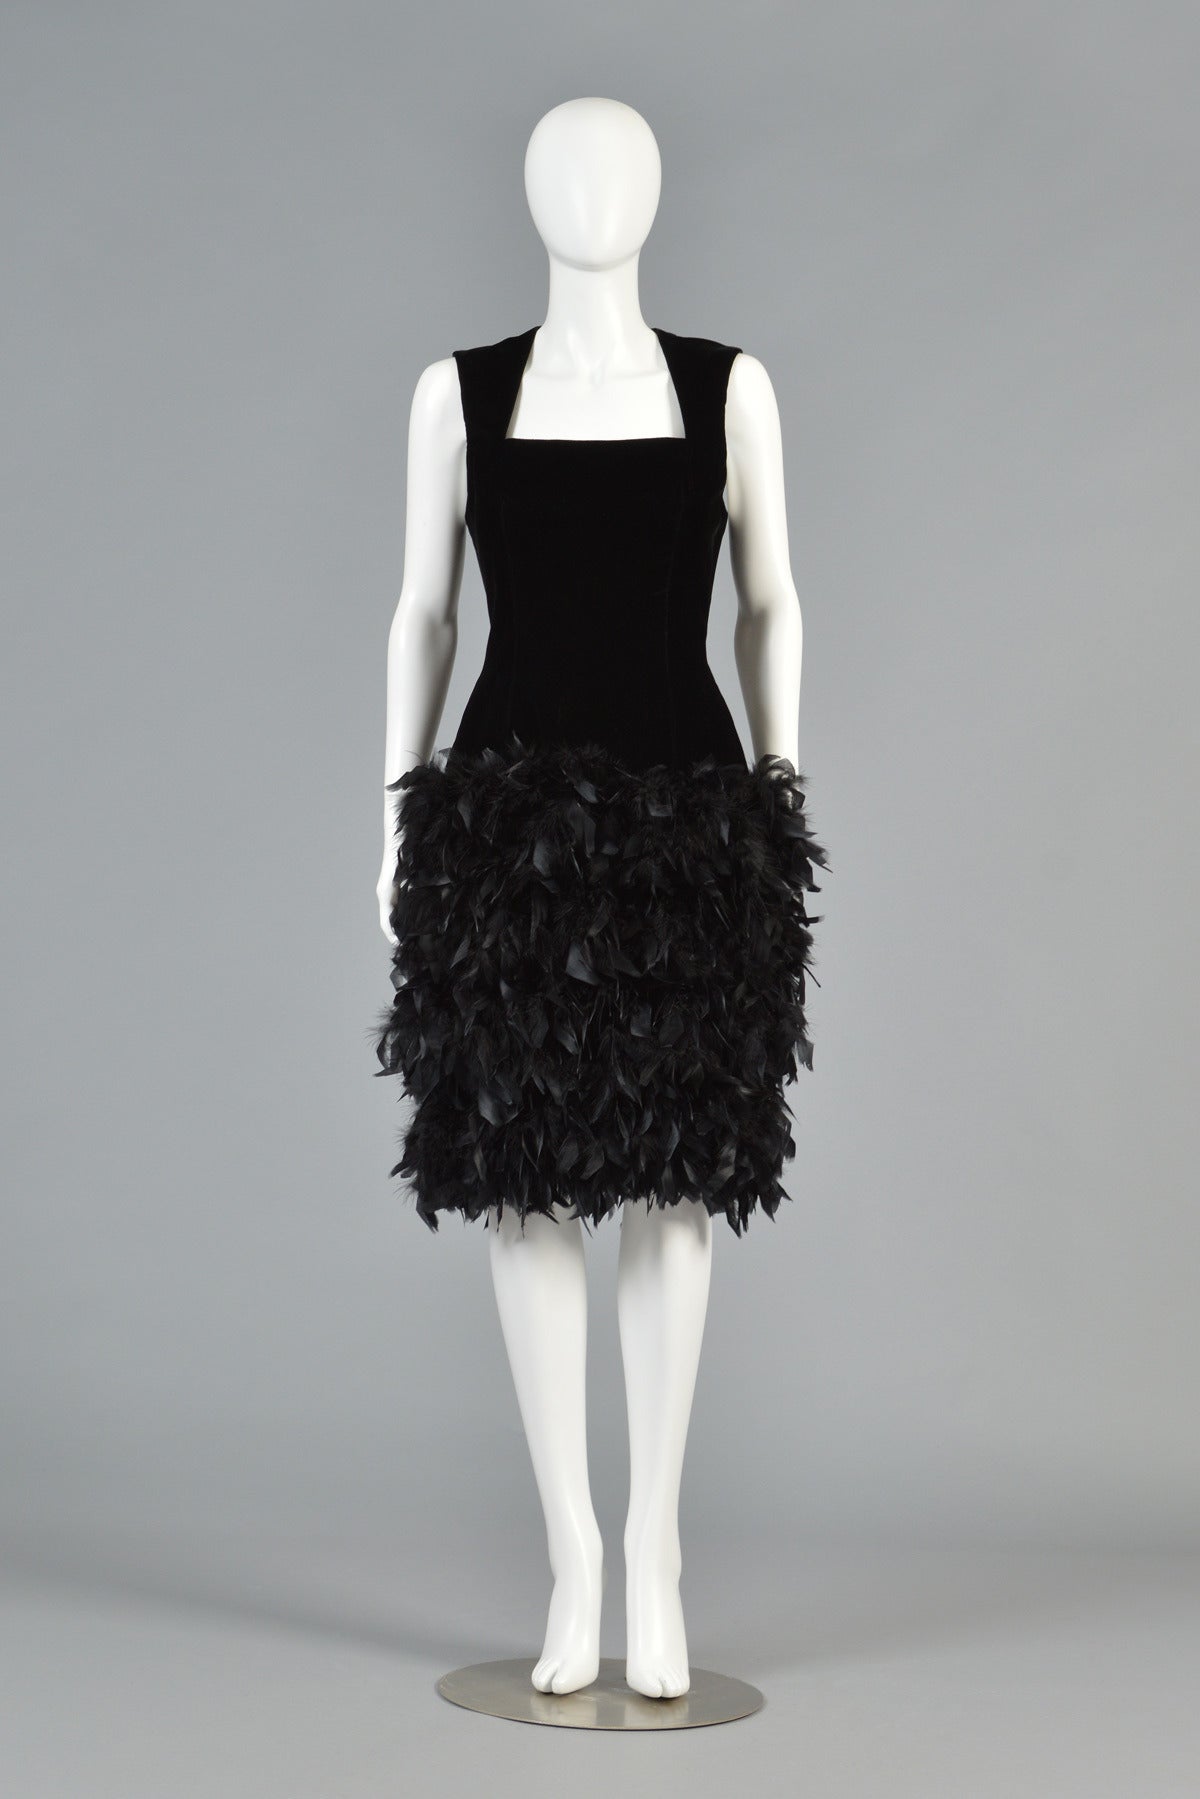 Truly awesome early 1990s vintage black velvet cocktail dress with feathered skirt! Absolutely killer piece. Amazing squared neckline with wide straps + nipped waist. The absolutely MASSIVE feathered skirt gives the piece an incredible silhouette.